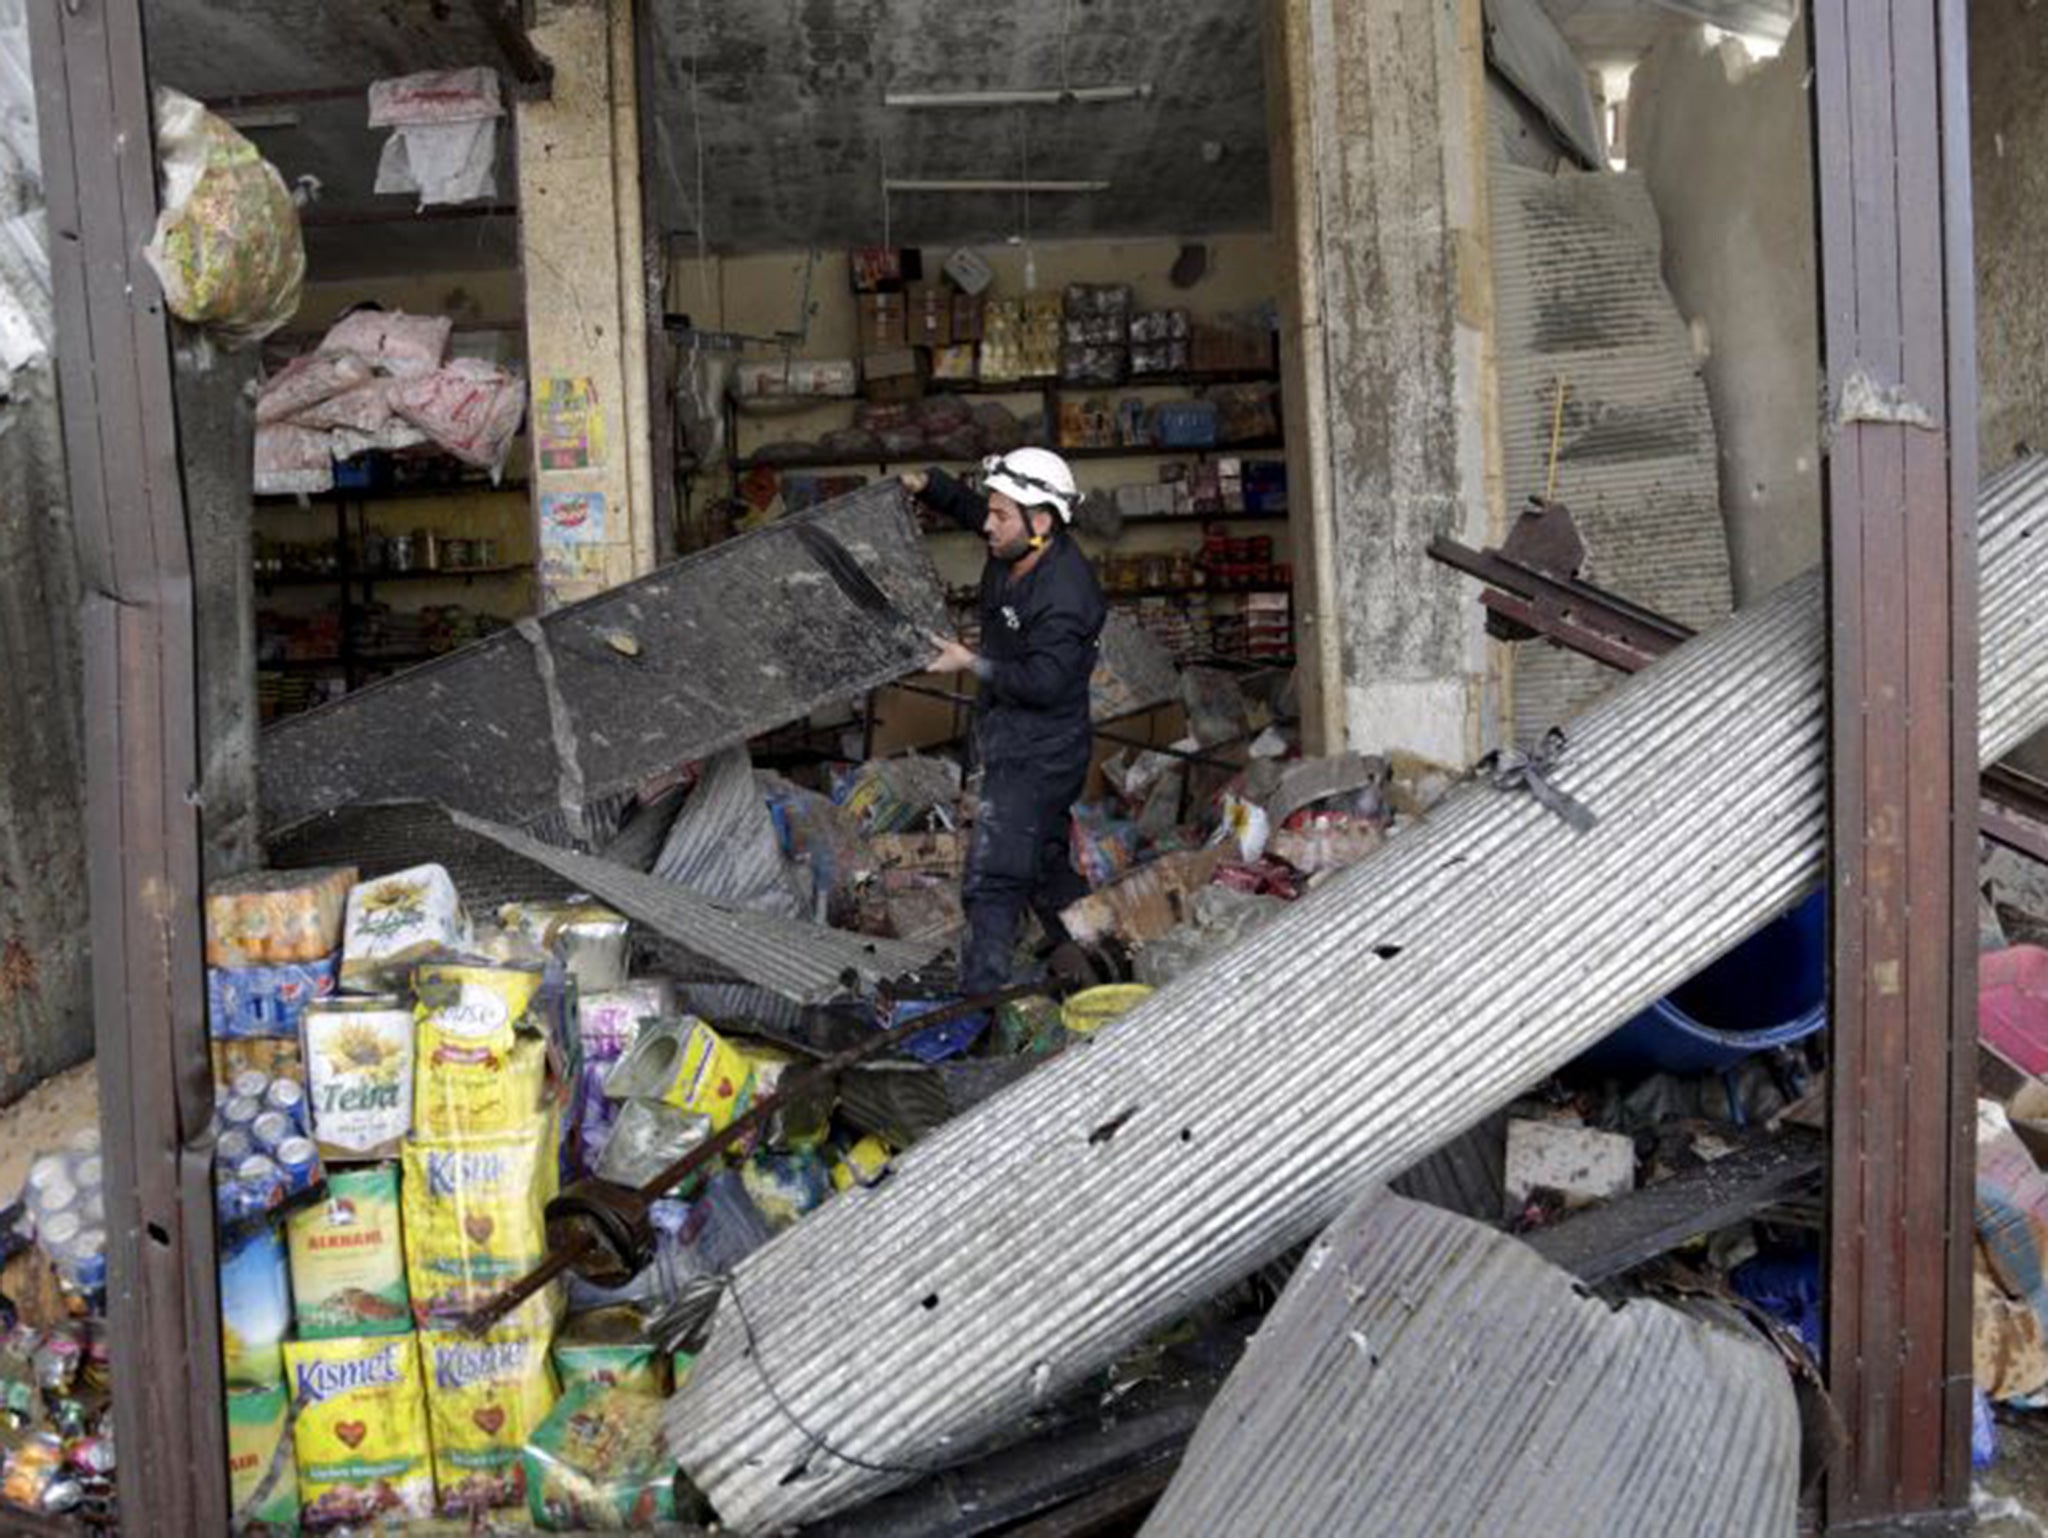 A civil defence member looks for survivors in a damaged shop at a site hit by what activists said was an air strike by forces of Syria's President Bashar al-Assad,